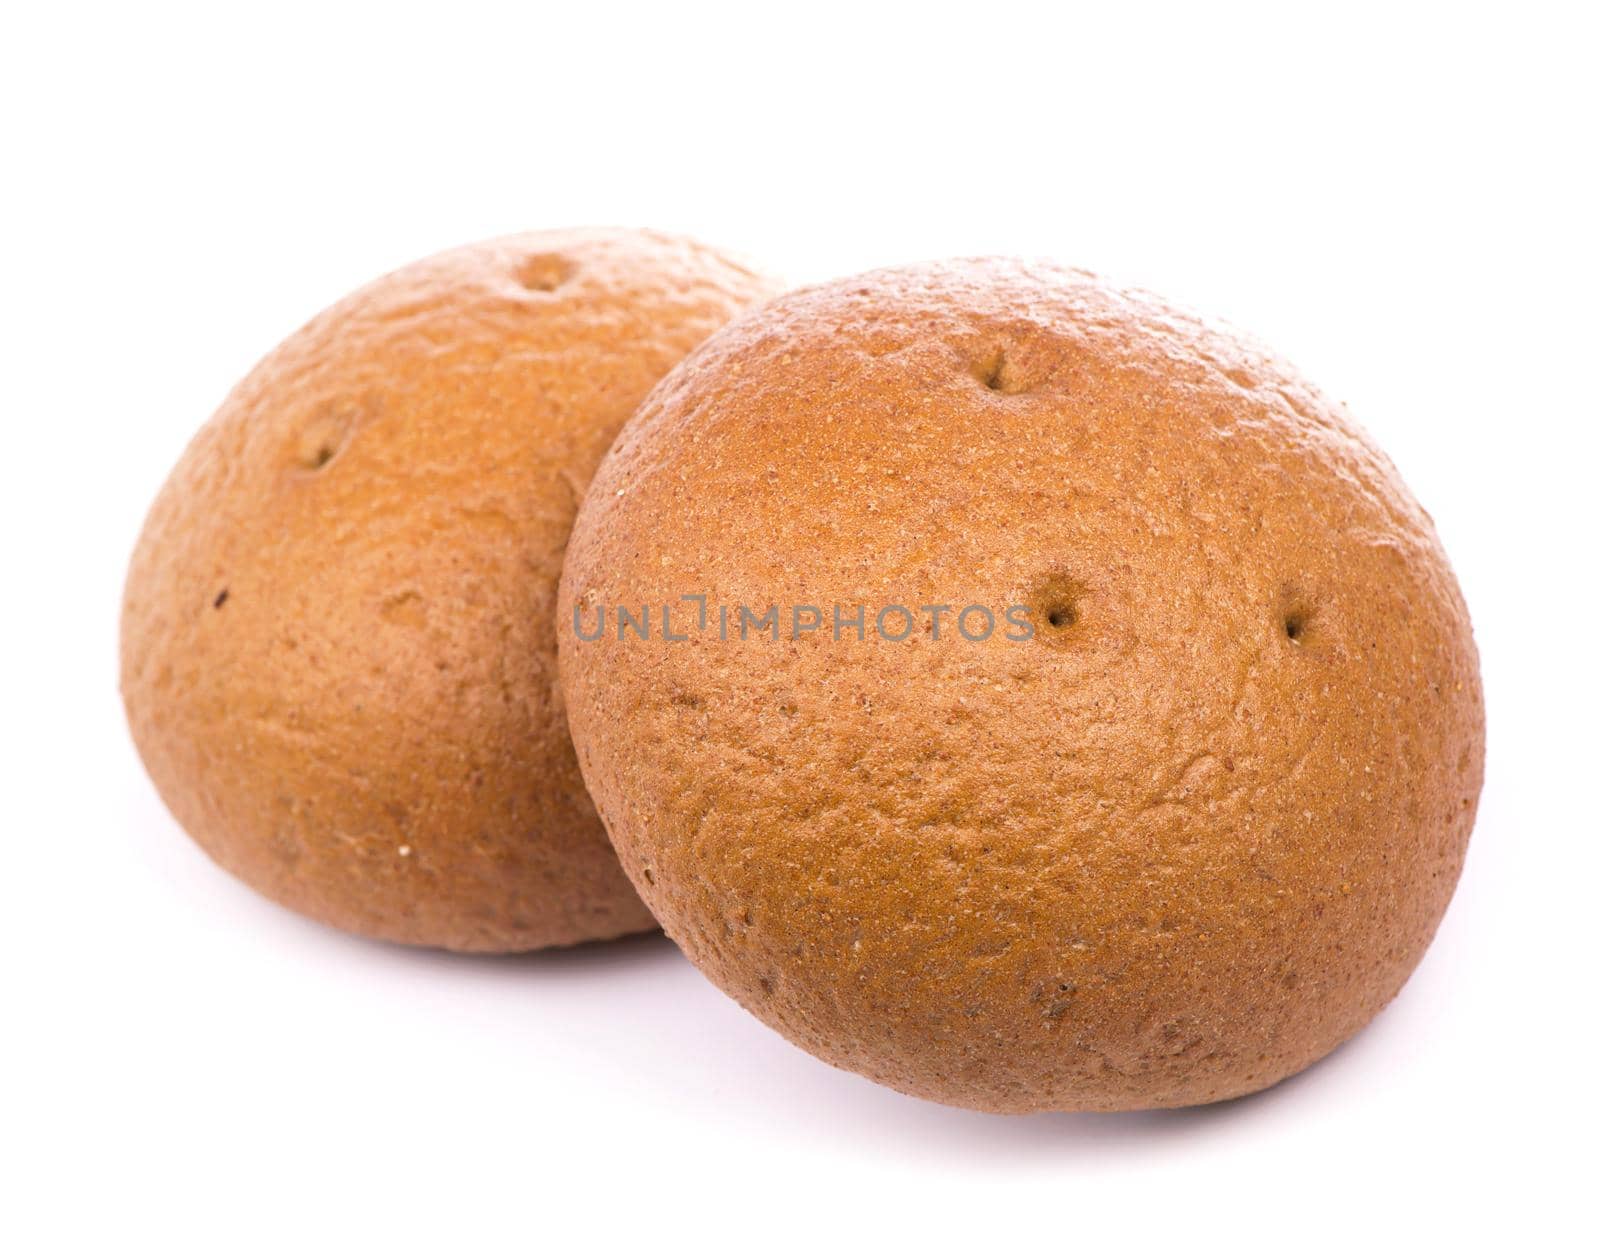 Homemade bread with raisins lie on a white background